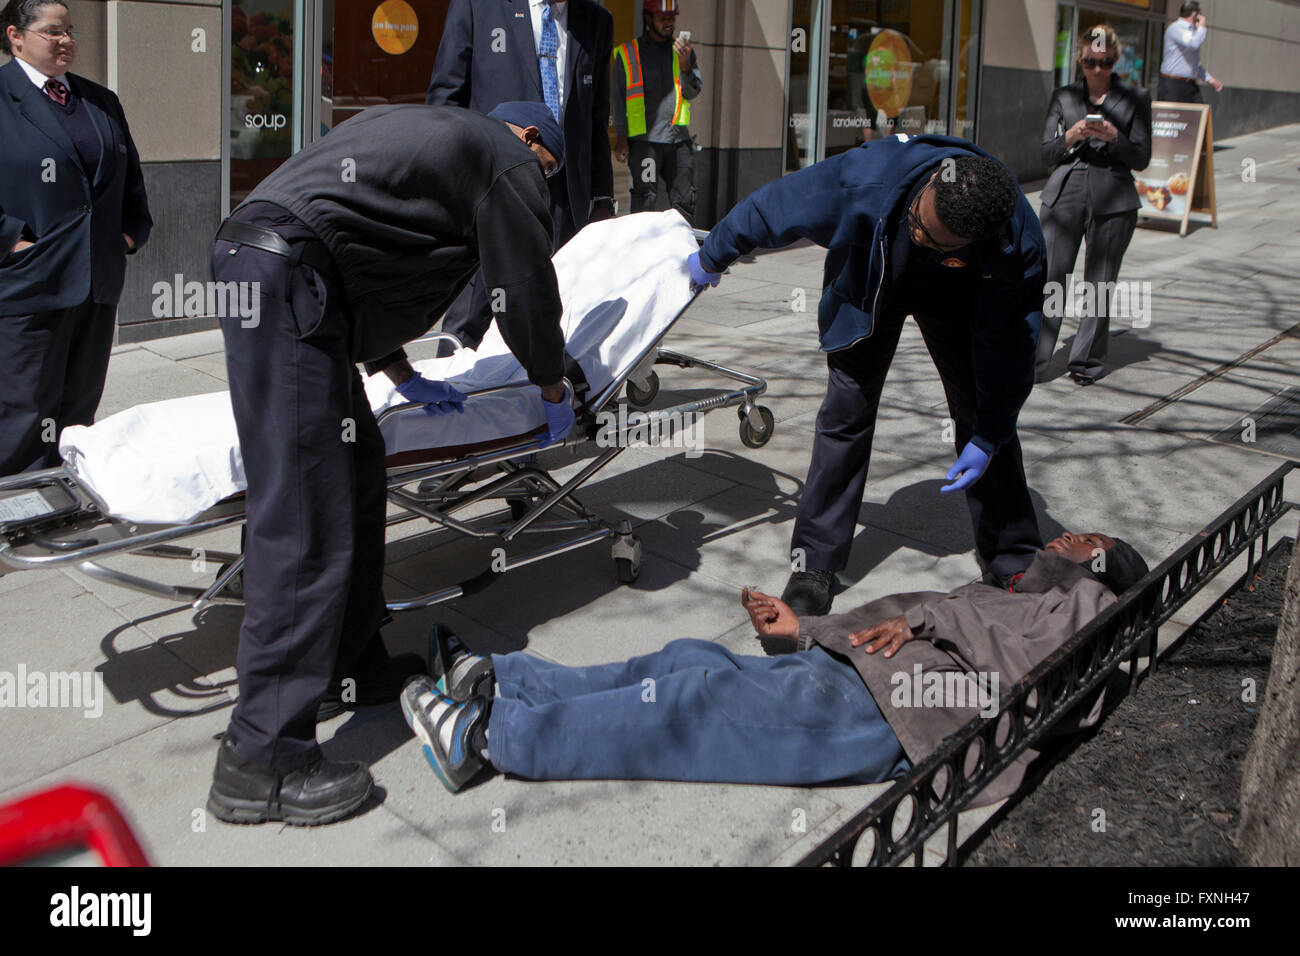 DC Fire & EMT team respond to a person in distress on sidewalk - Washington, DC USA Stock Photo